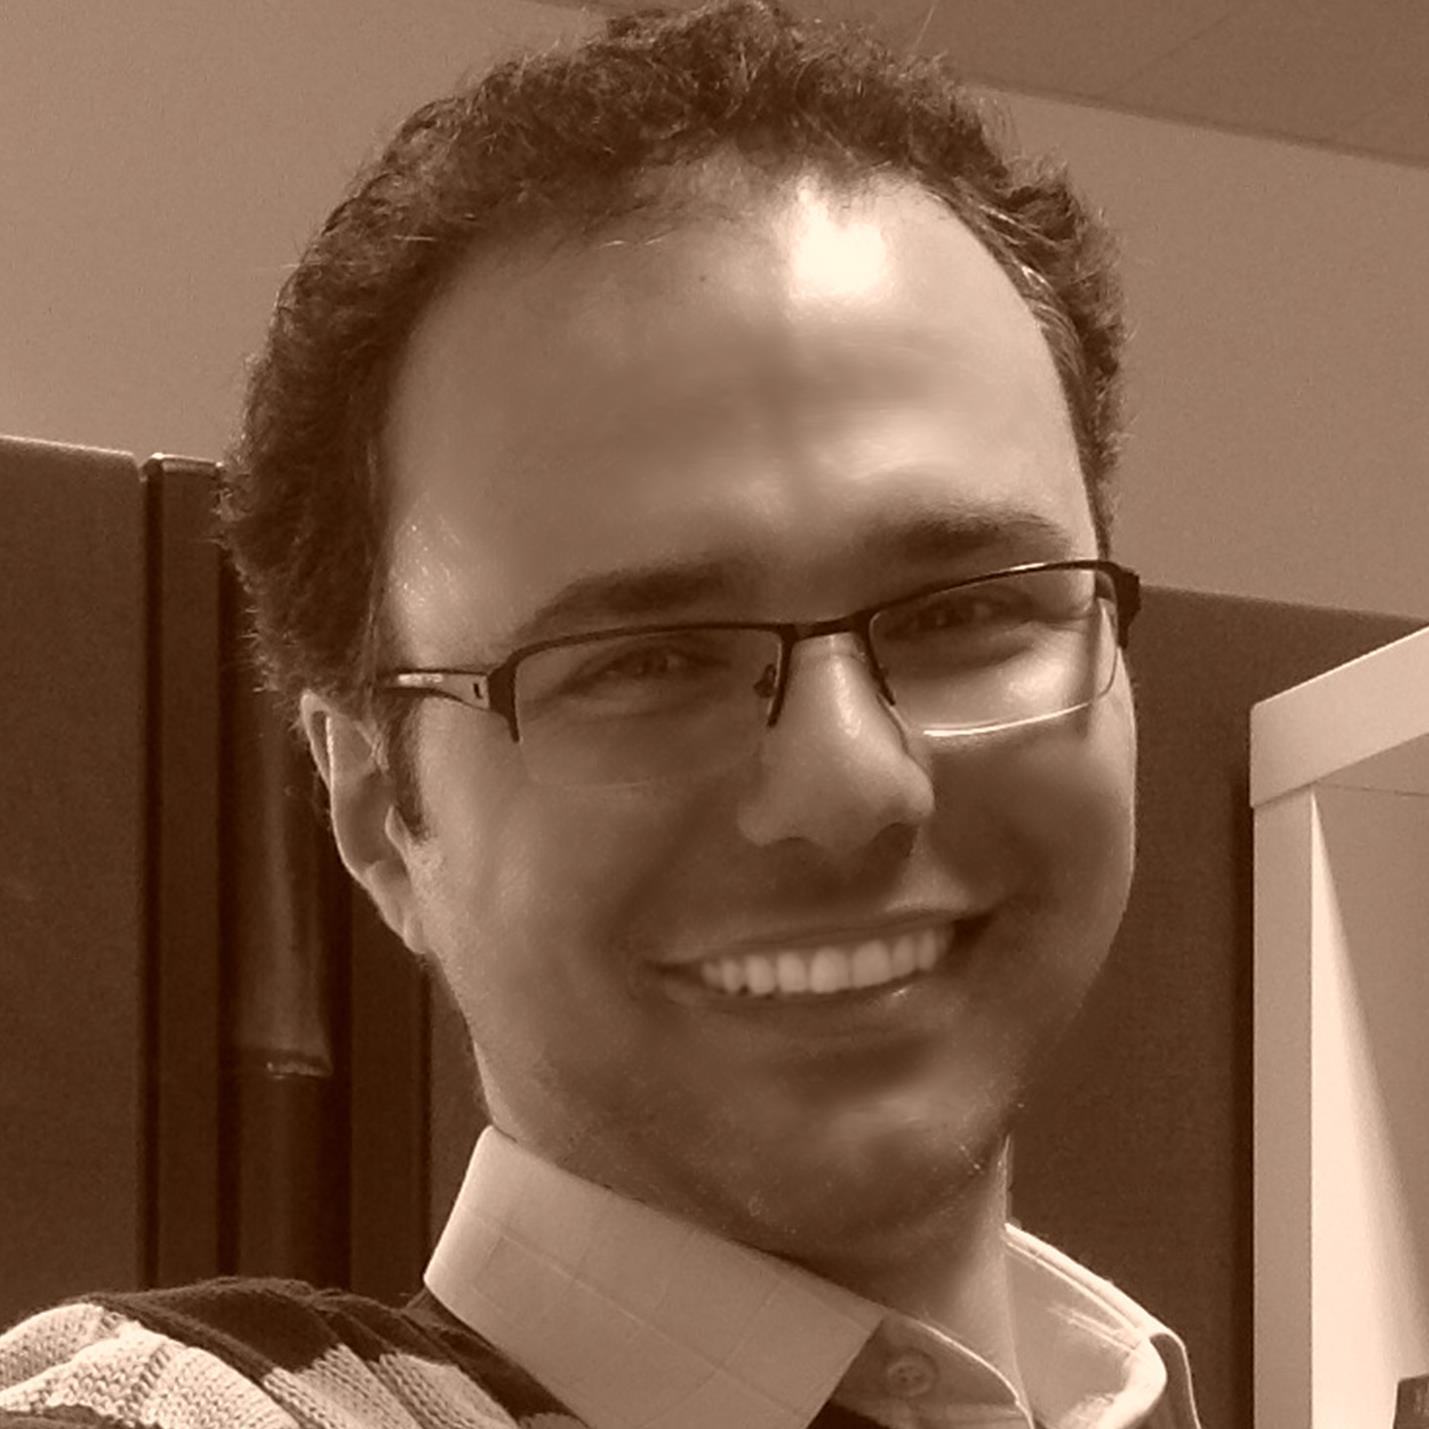 Hossein Fotouhi is assistant professor at Mälardalen University. My research interests are WSNs, IoT, CPS and SDN.